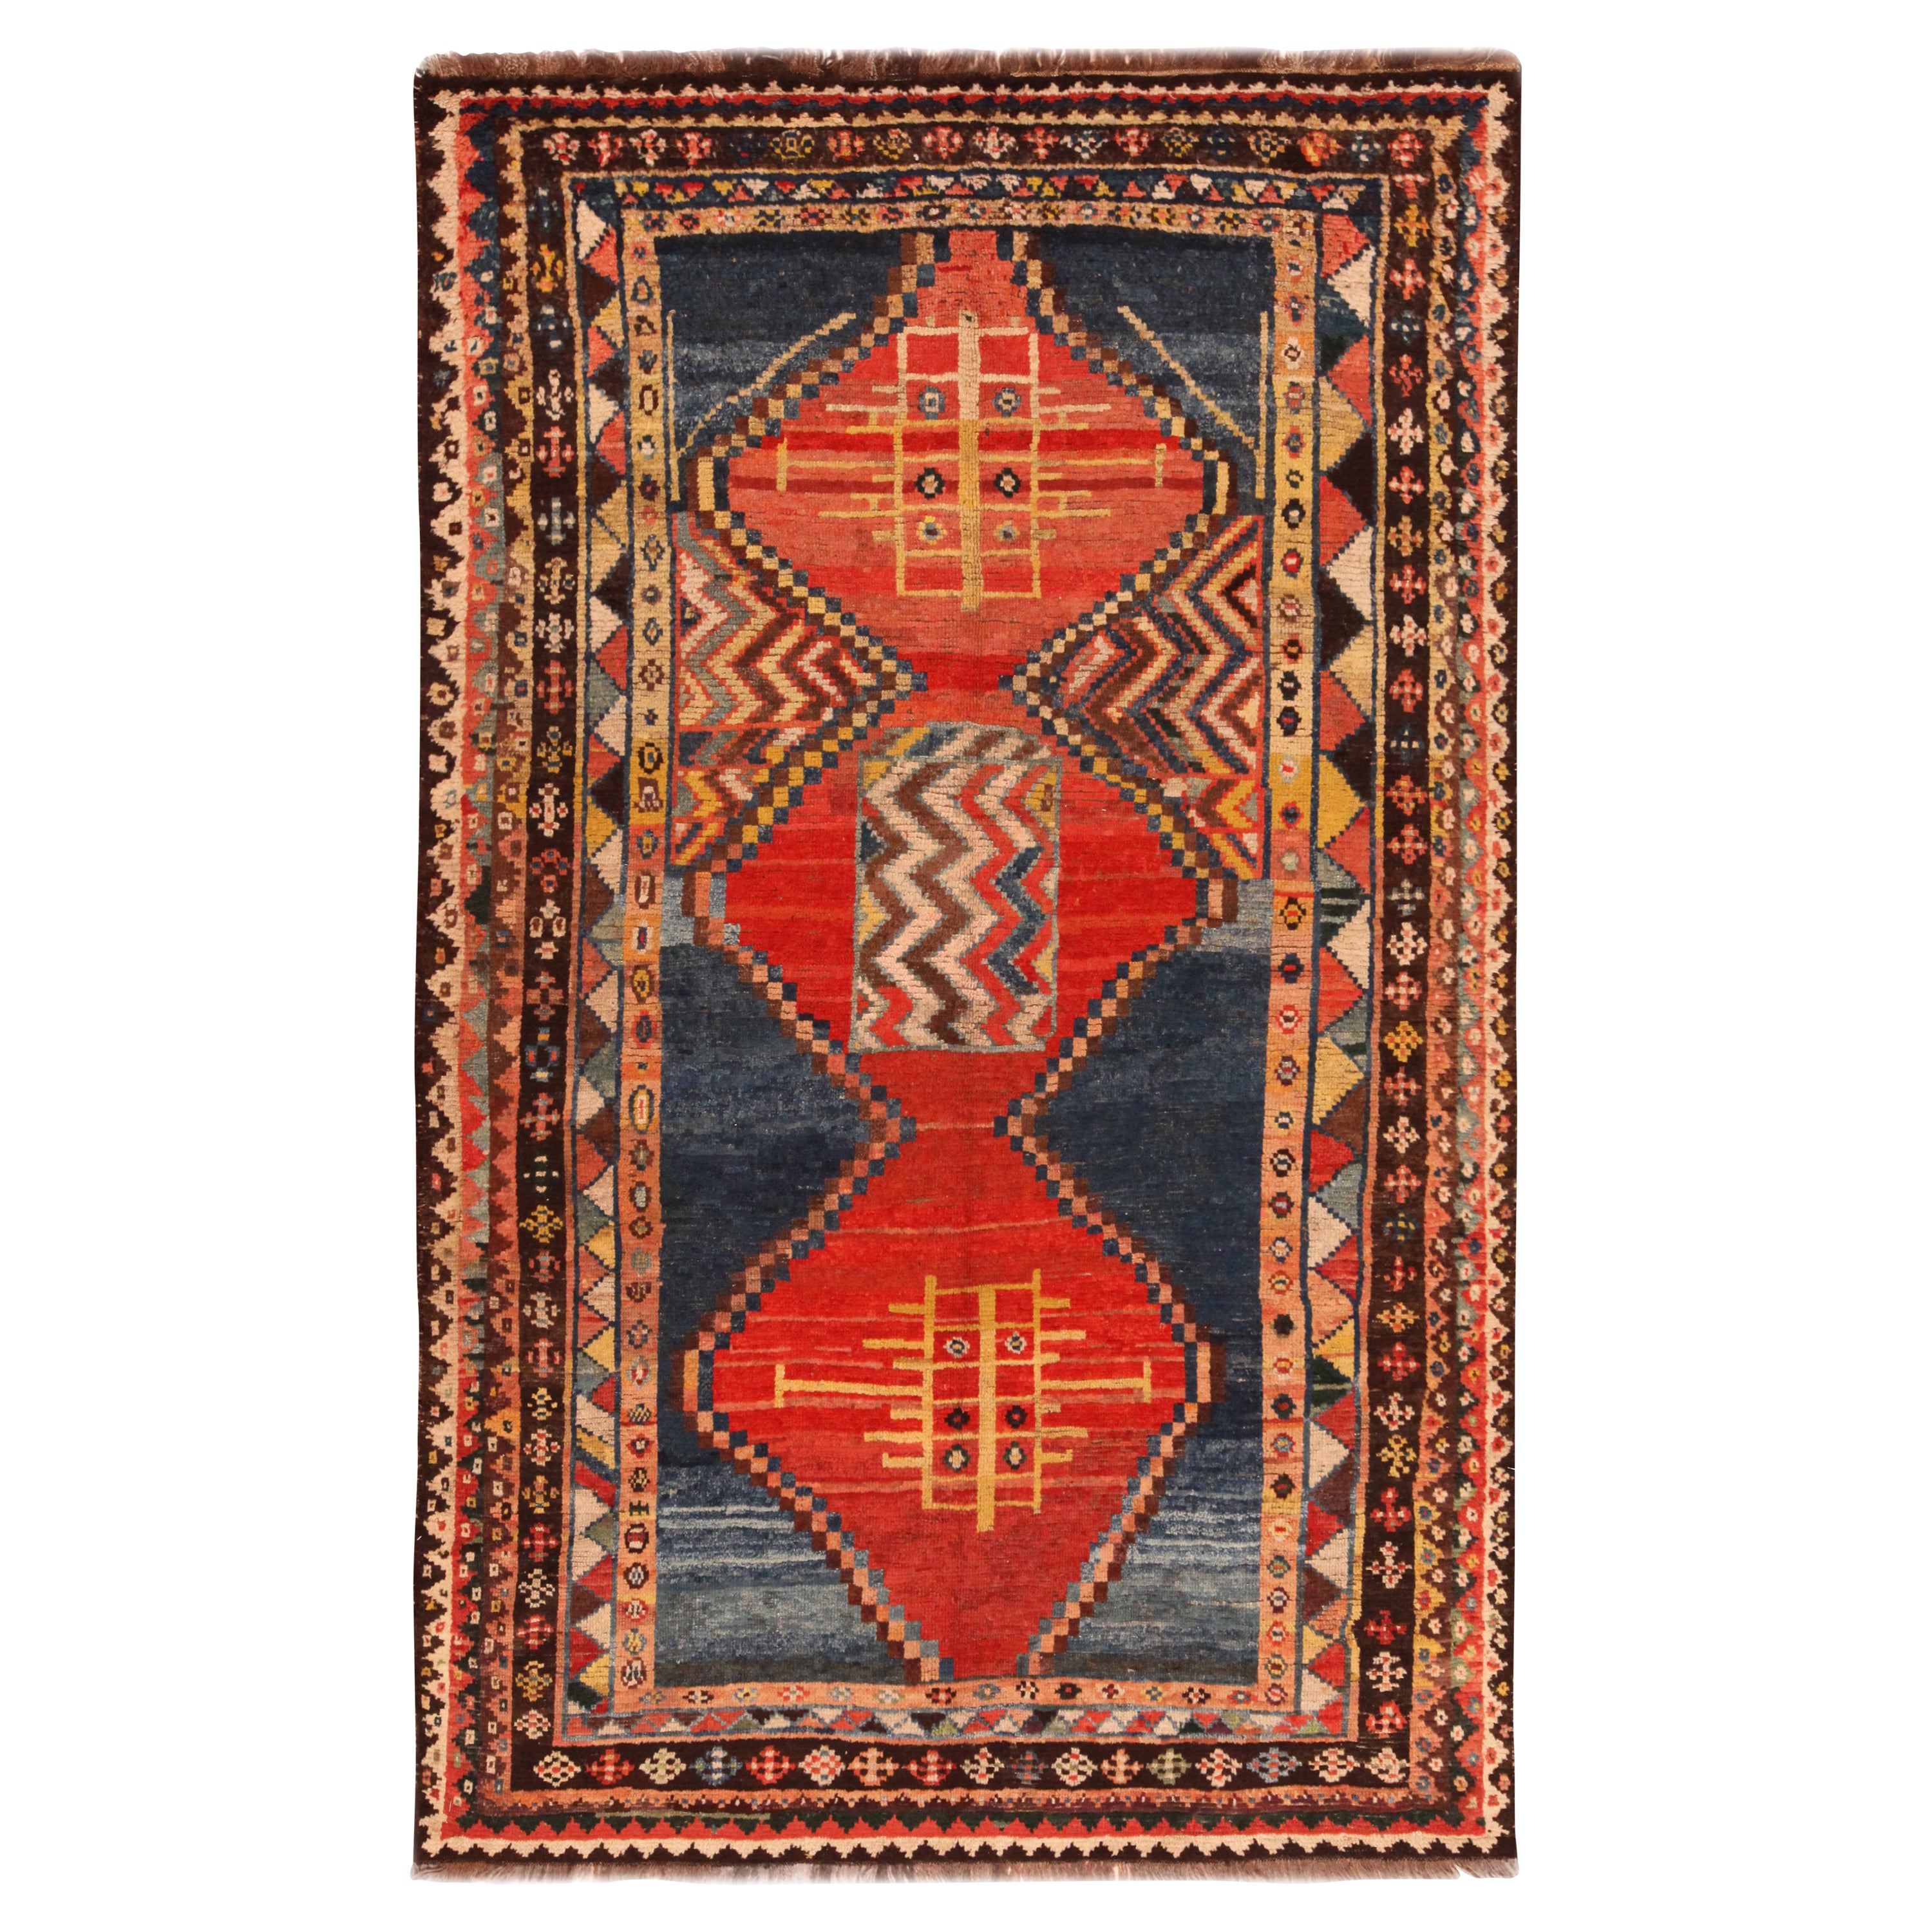 Nazmiyal Collection Vintage Persian Gabbeh Rug. Size: 5 ft 10 in x 9 ft 2 in